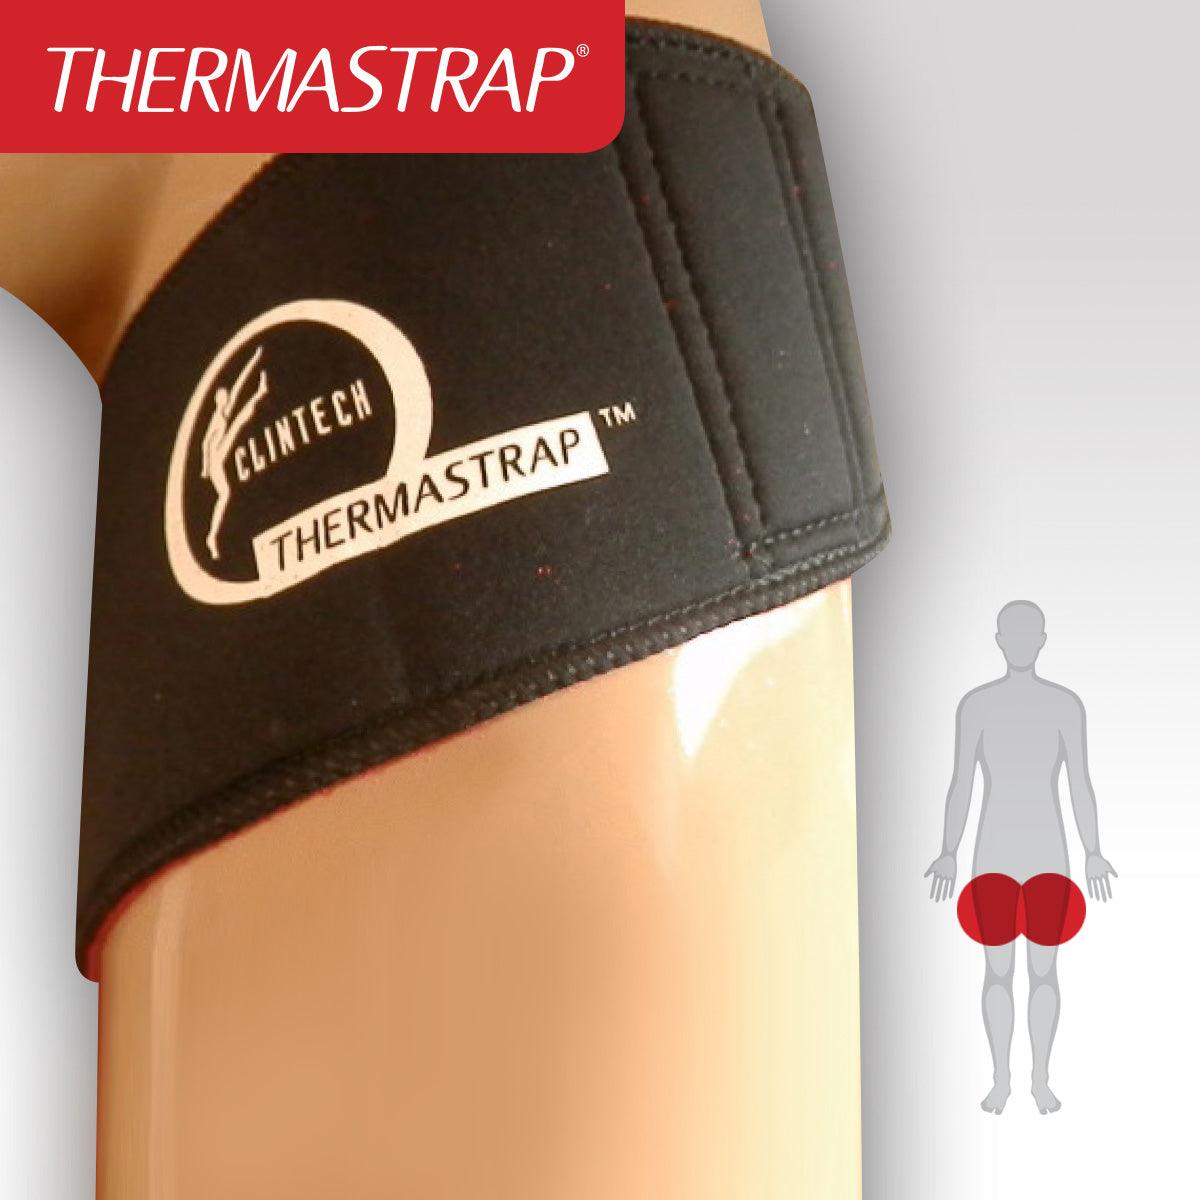 Thermastrap Groin Strap